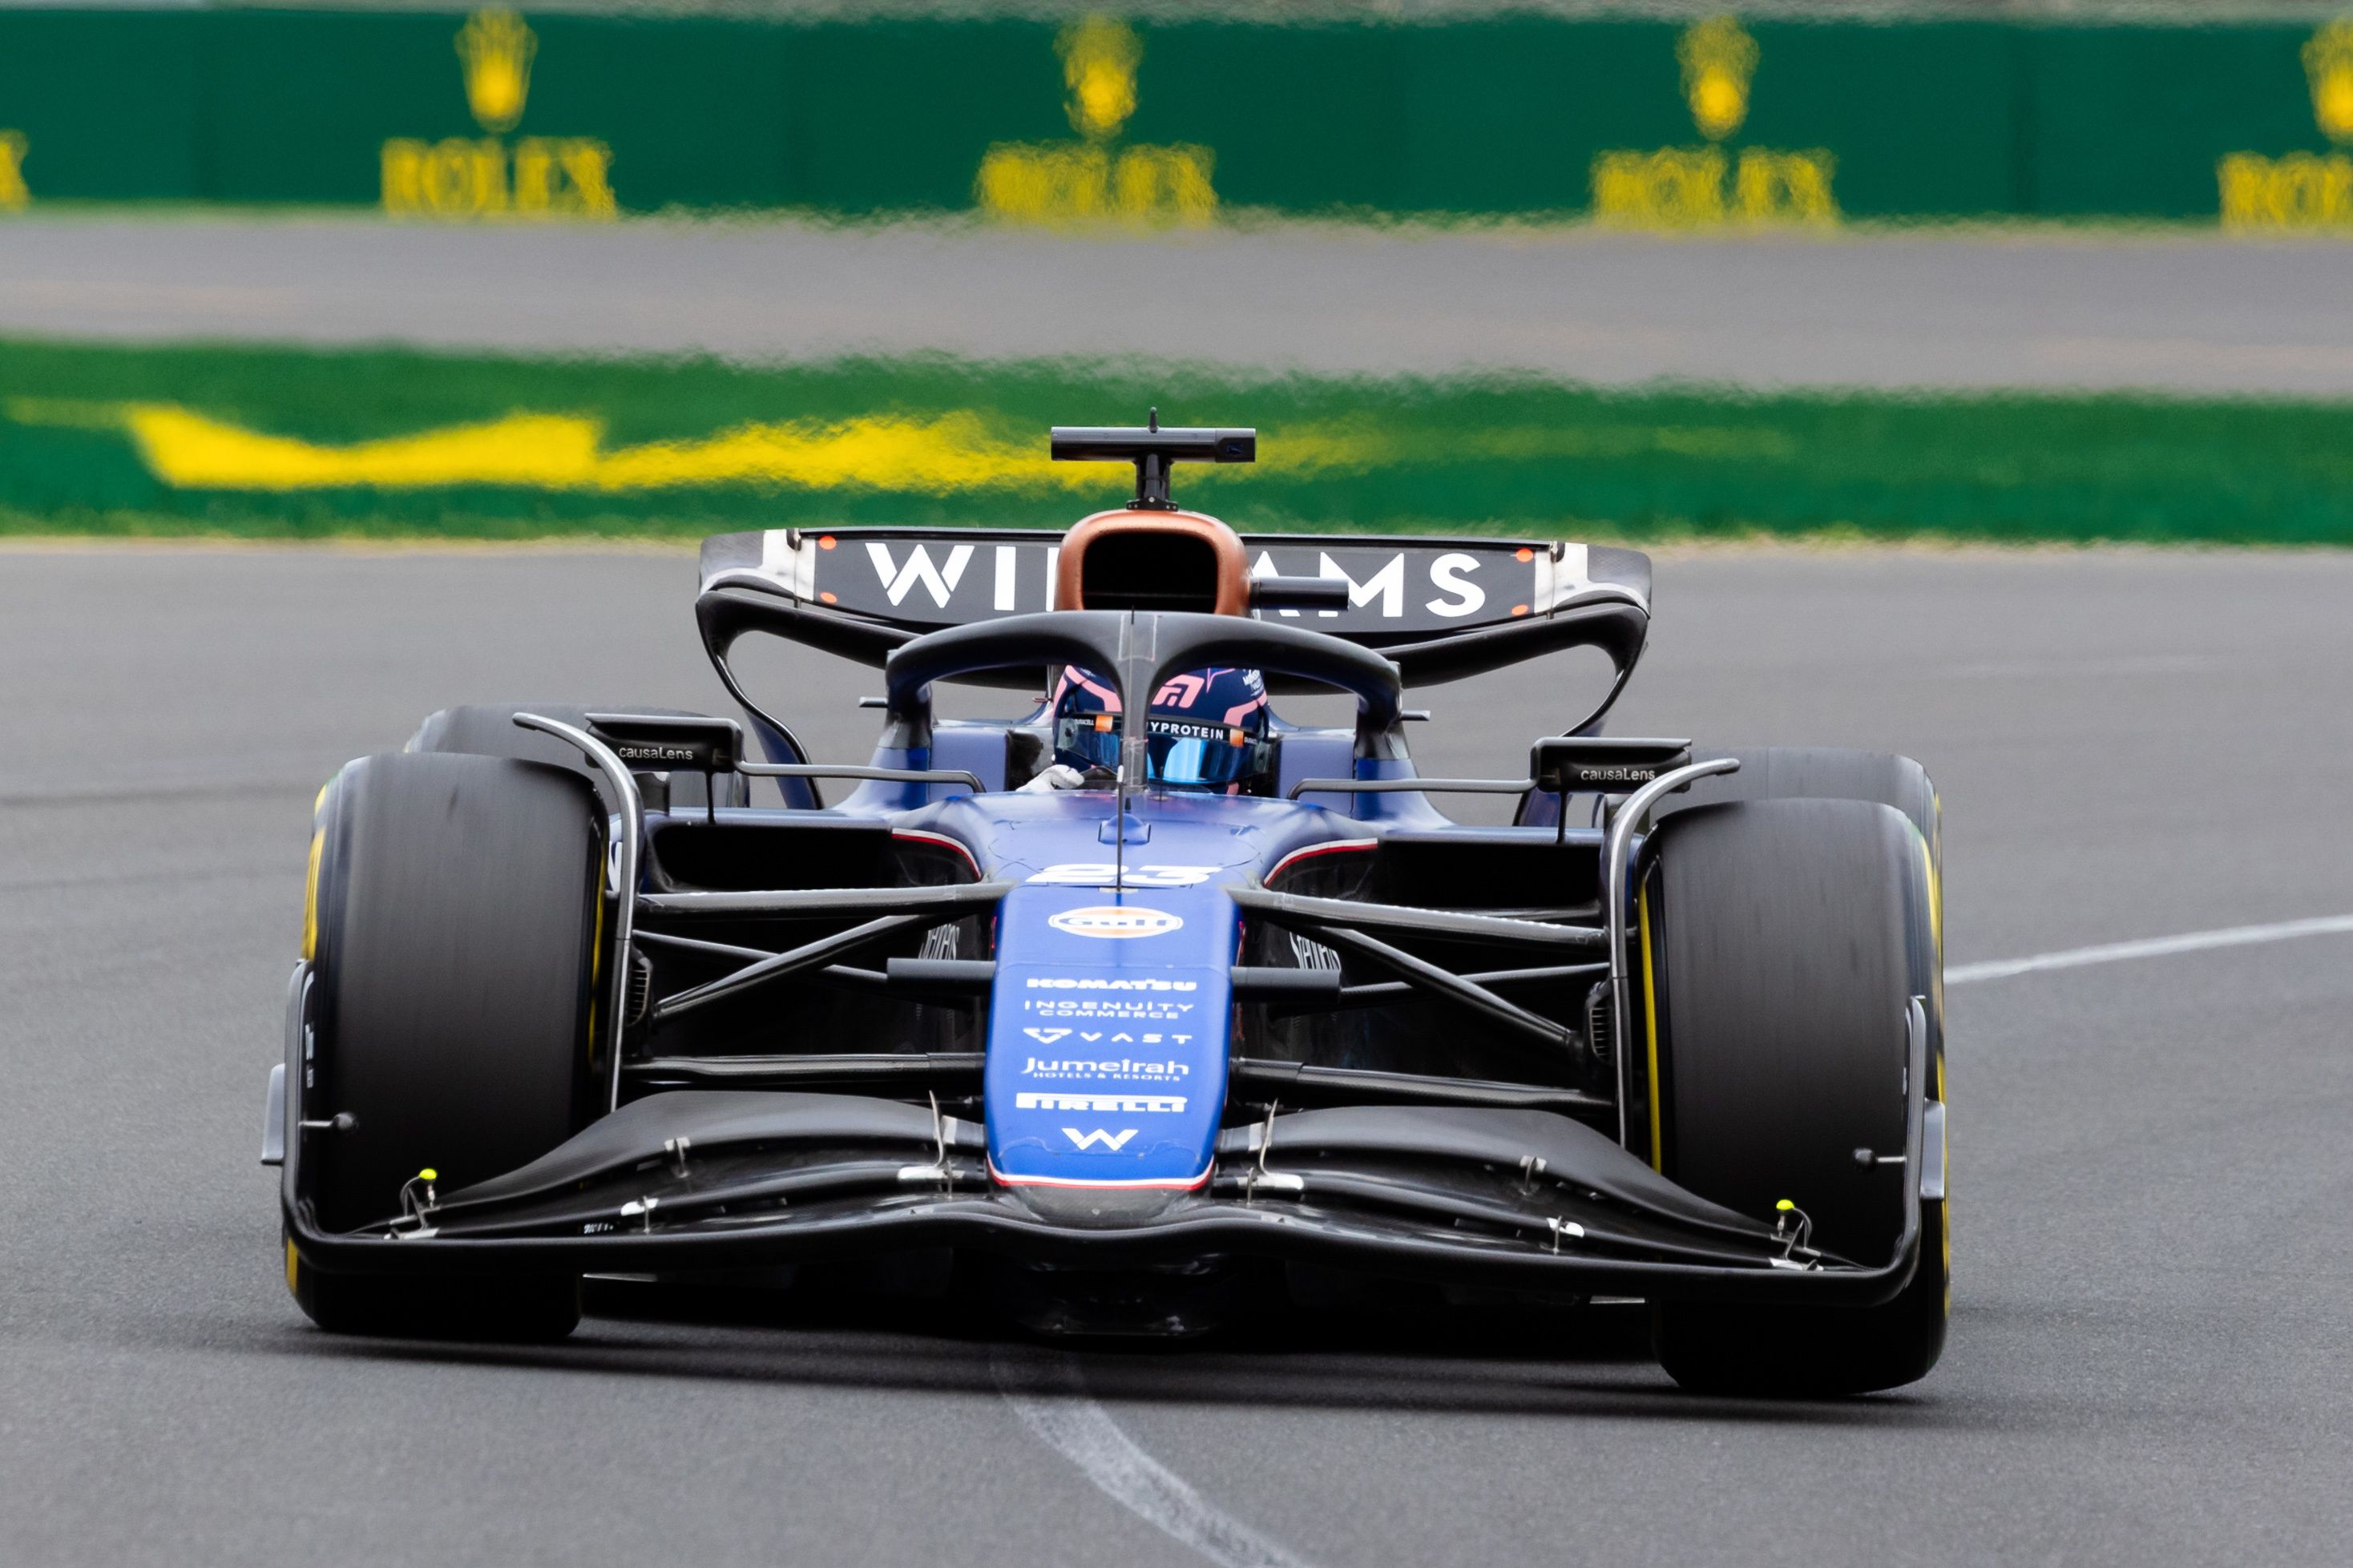 Williams' team boss rips 'unacceptable' chassis shortage after driver kicked out of own car